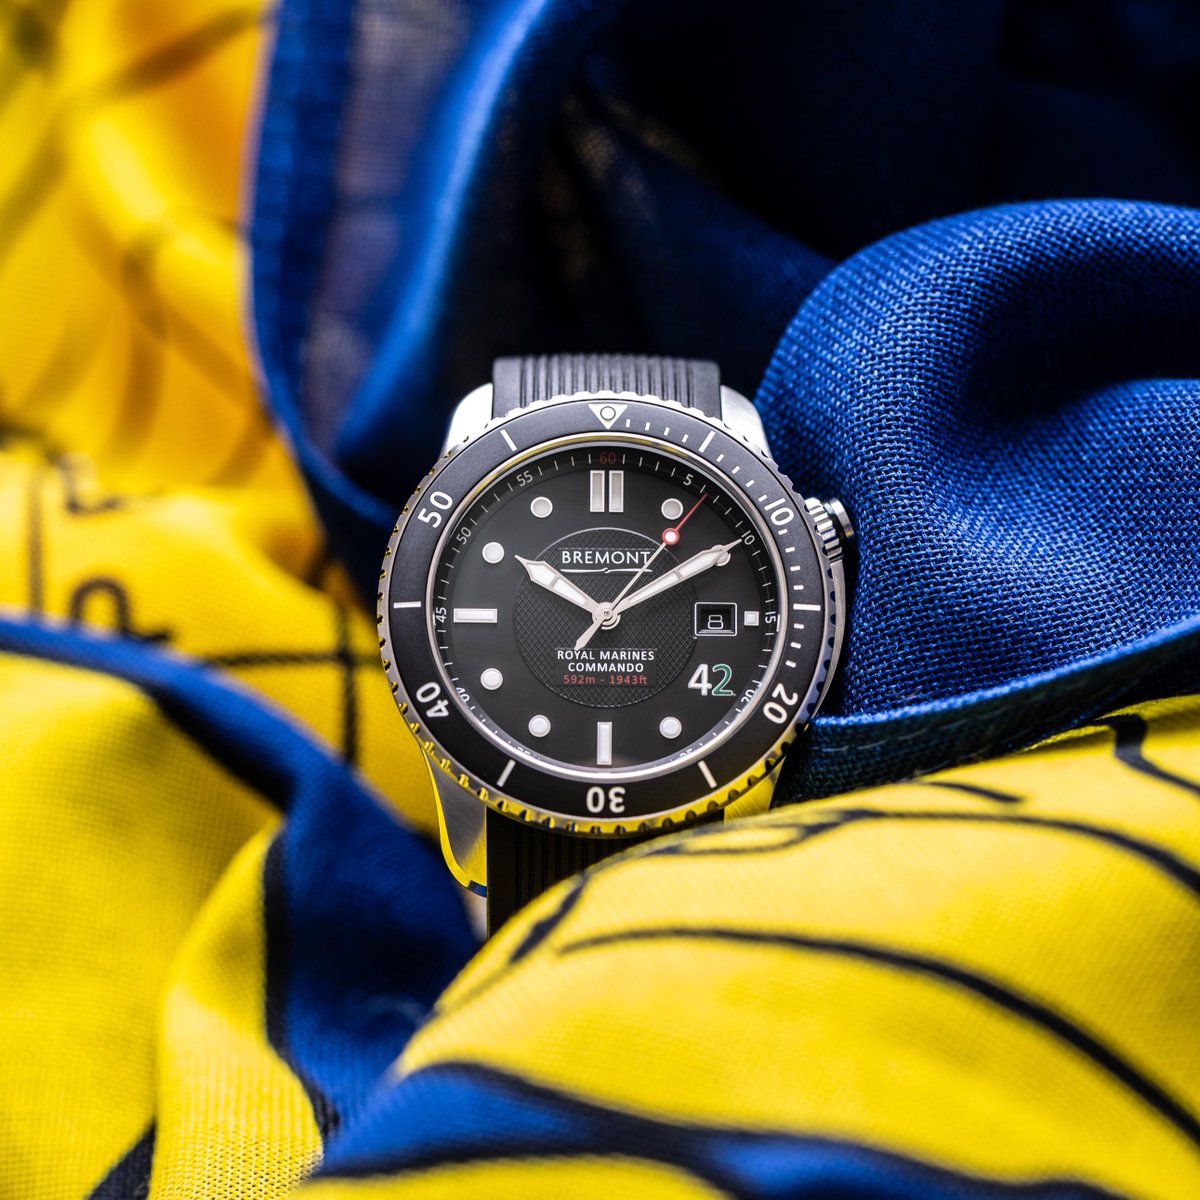 By Sea, By Land 🌊 ⛰️ The limited production Bremont S500 42 Commando RM watch is only available to serving and retired members of 42 Commando RM. For more information contact: military@bremont.com #Bremont #military #royalmarines #watches